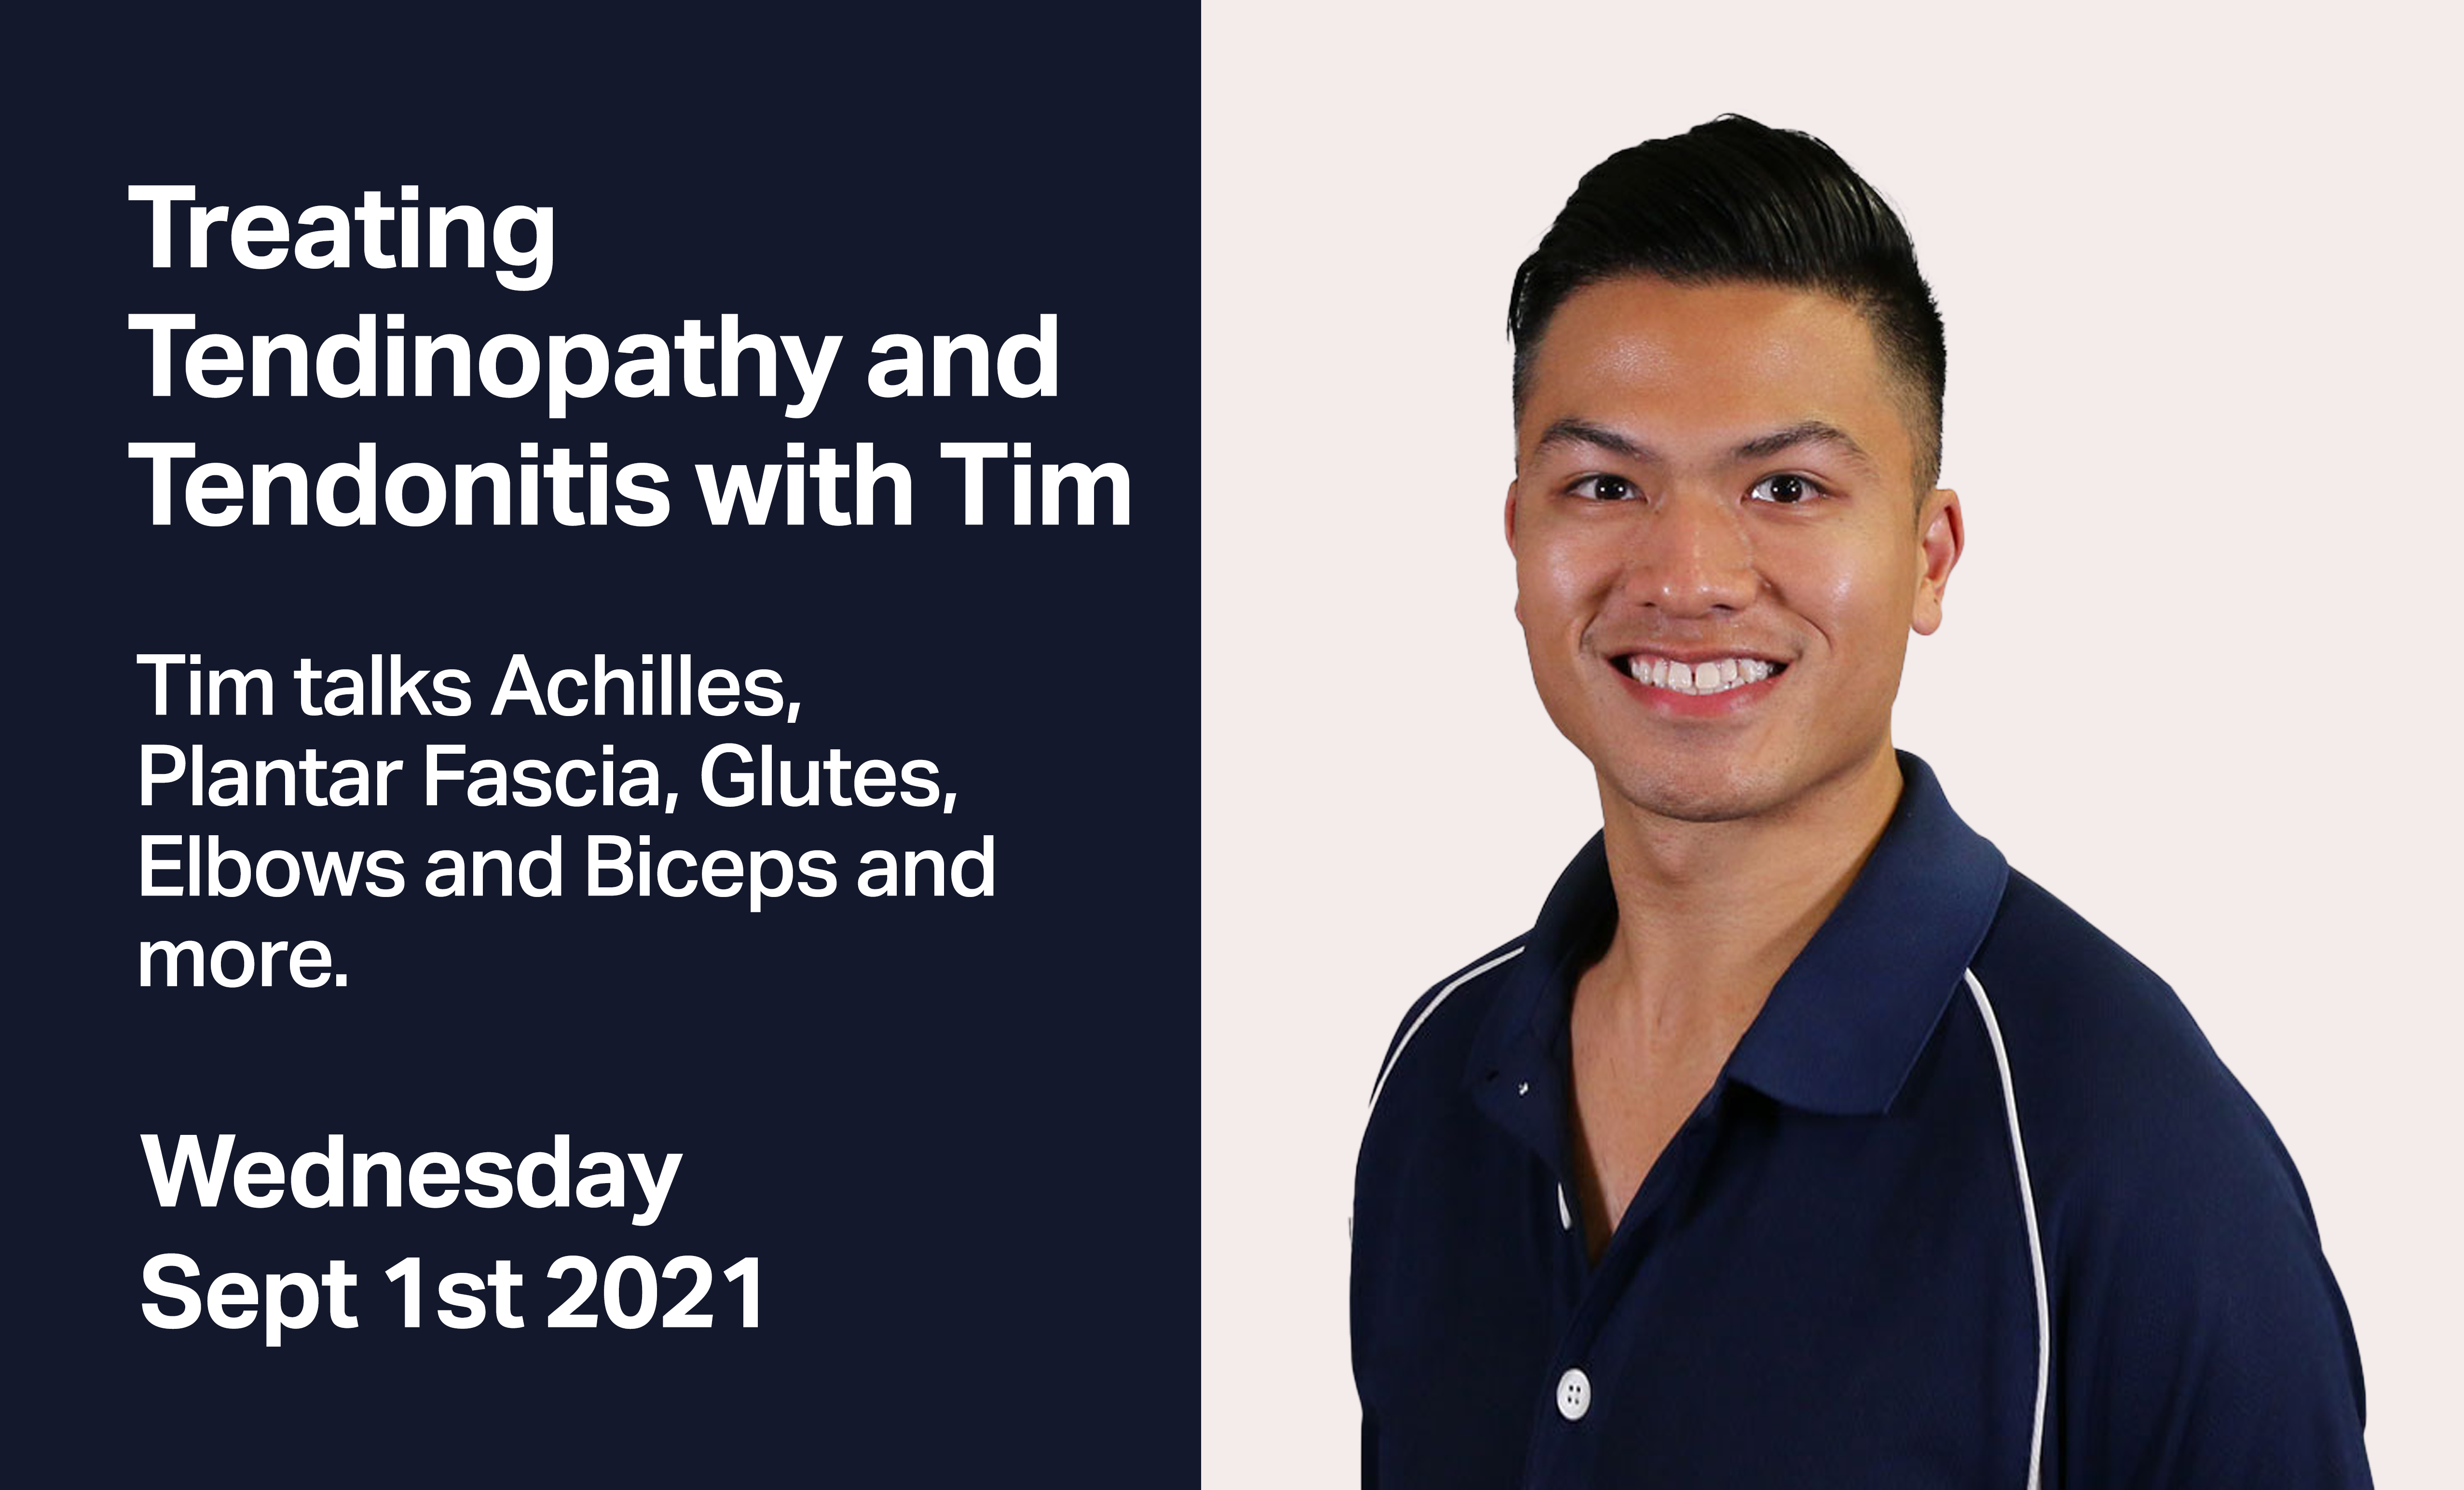 Lifestyle Event Sept 1st Tendonitis with Tim